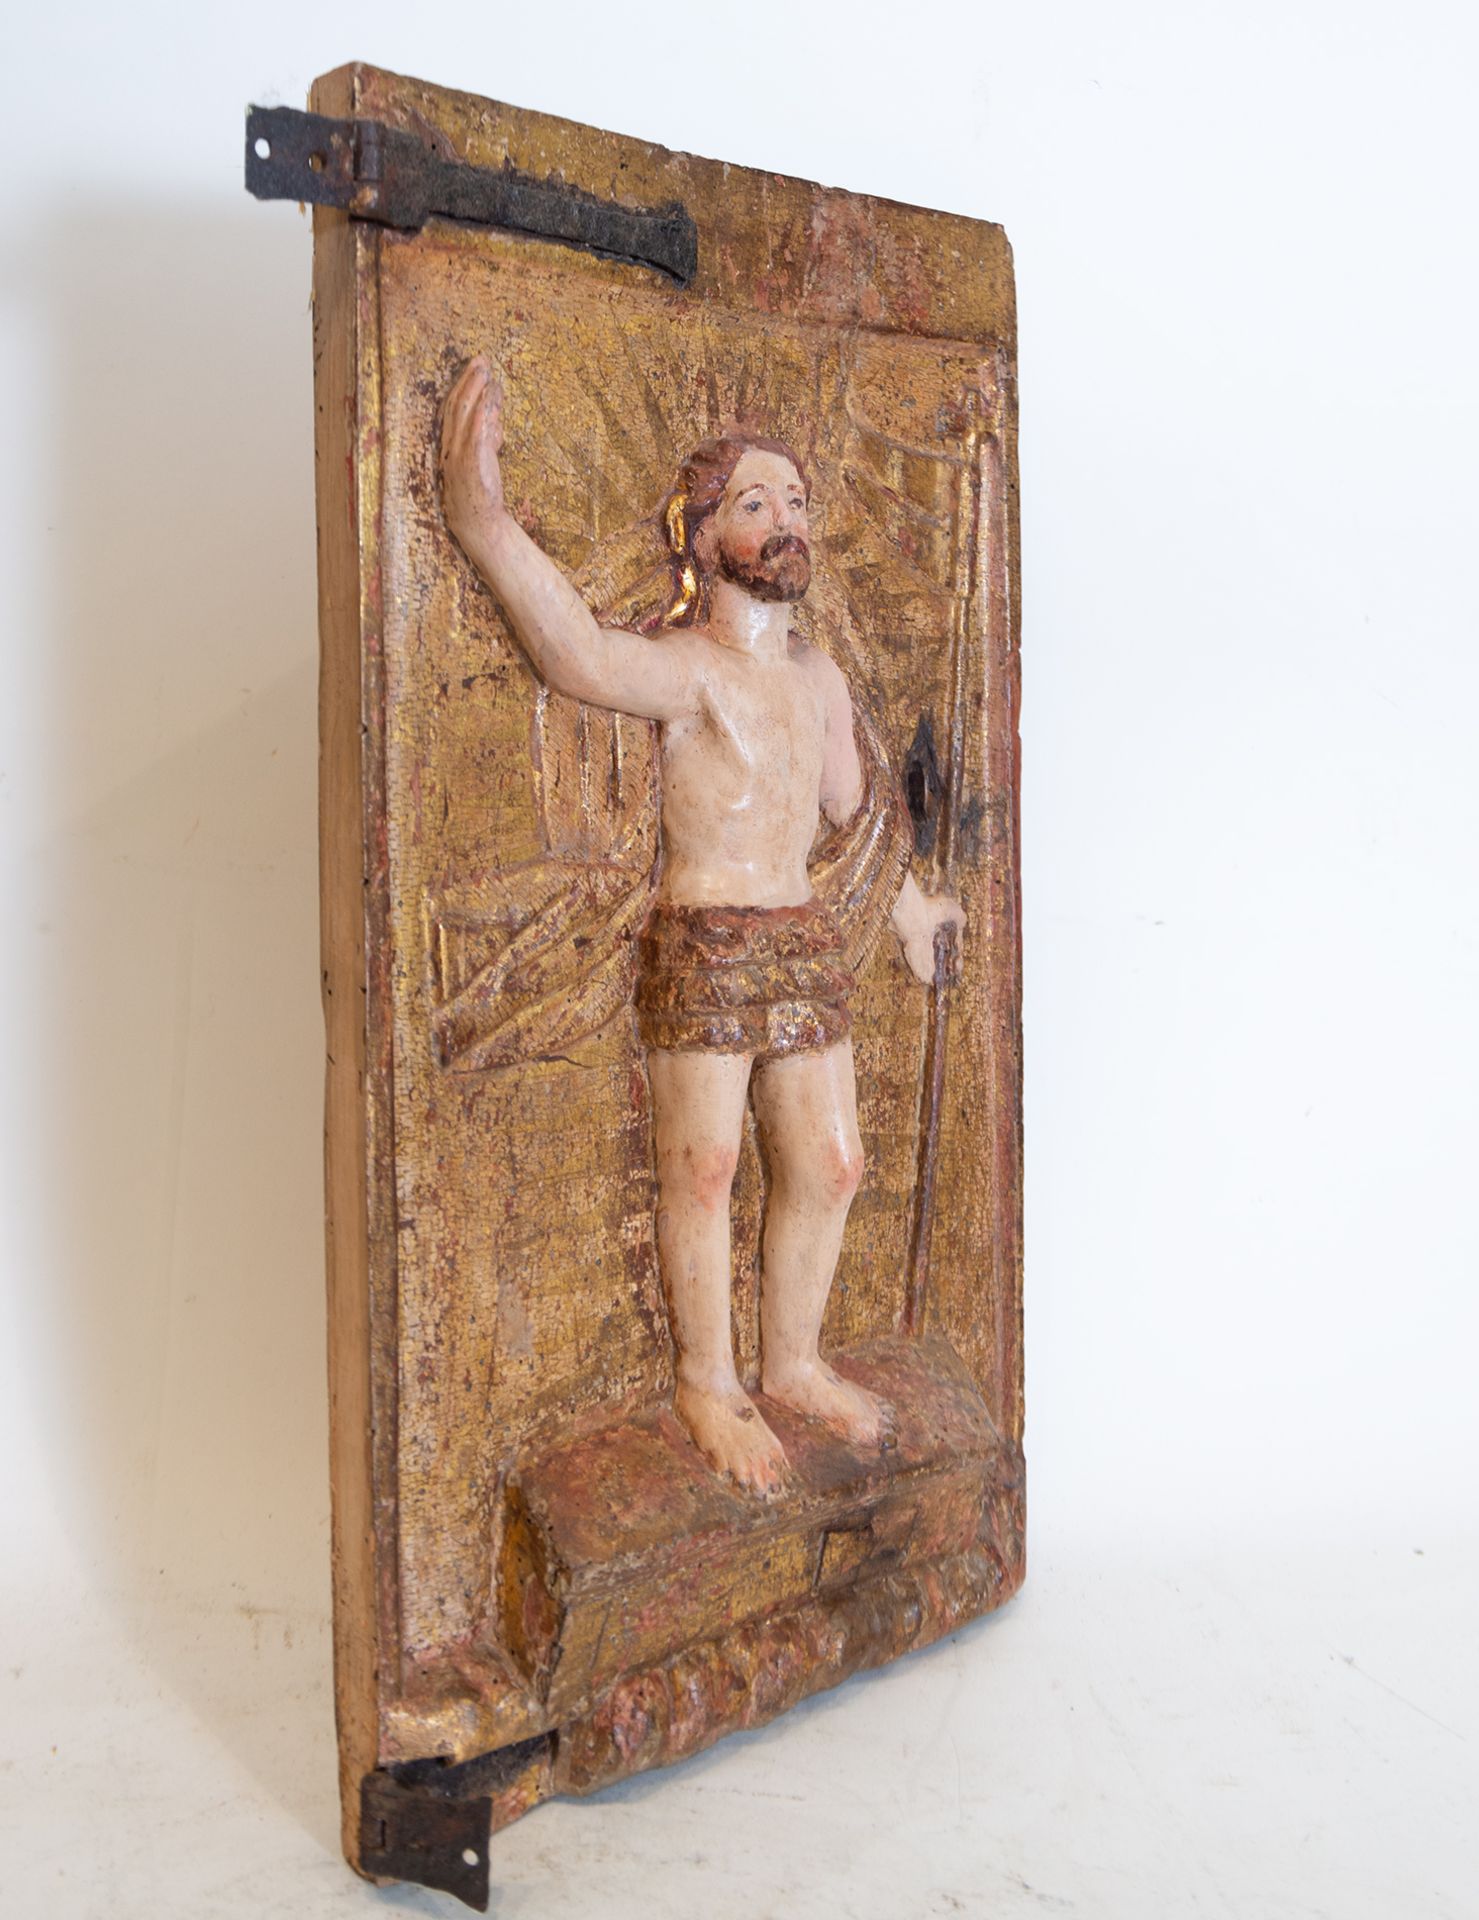 Tabernacle door with the risen Christ, Castilian school of the 16th century - Image 3 of 4